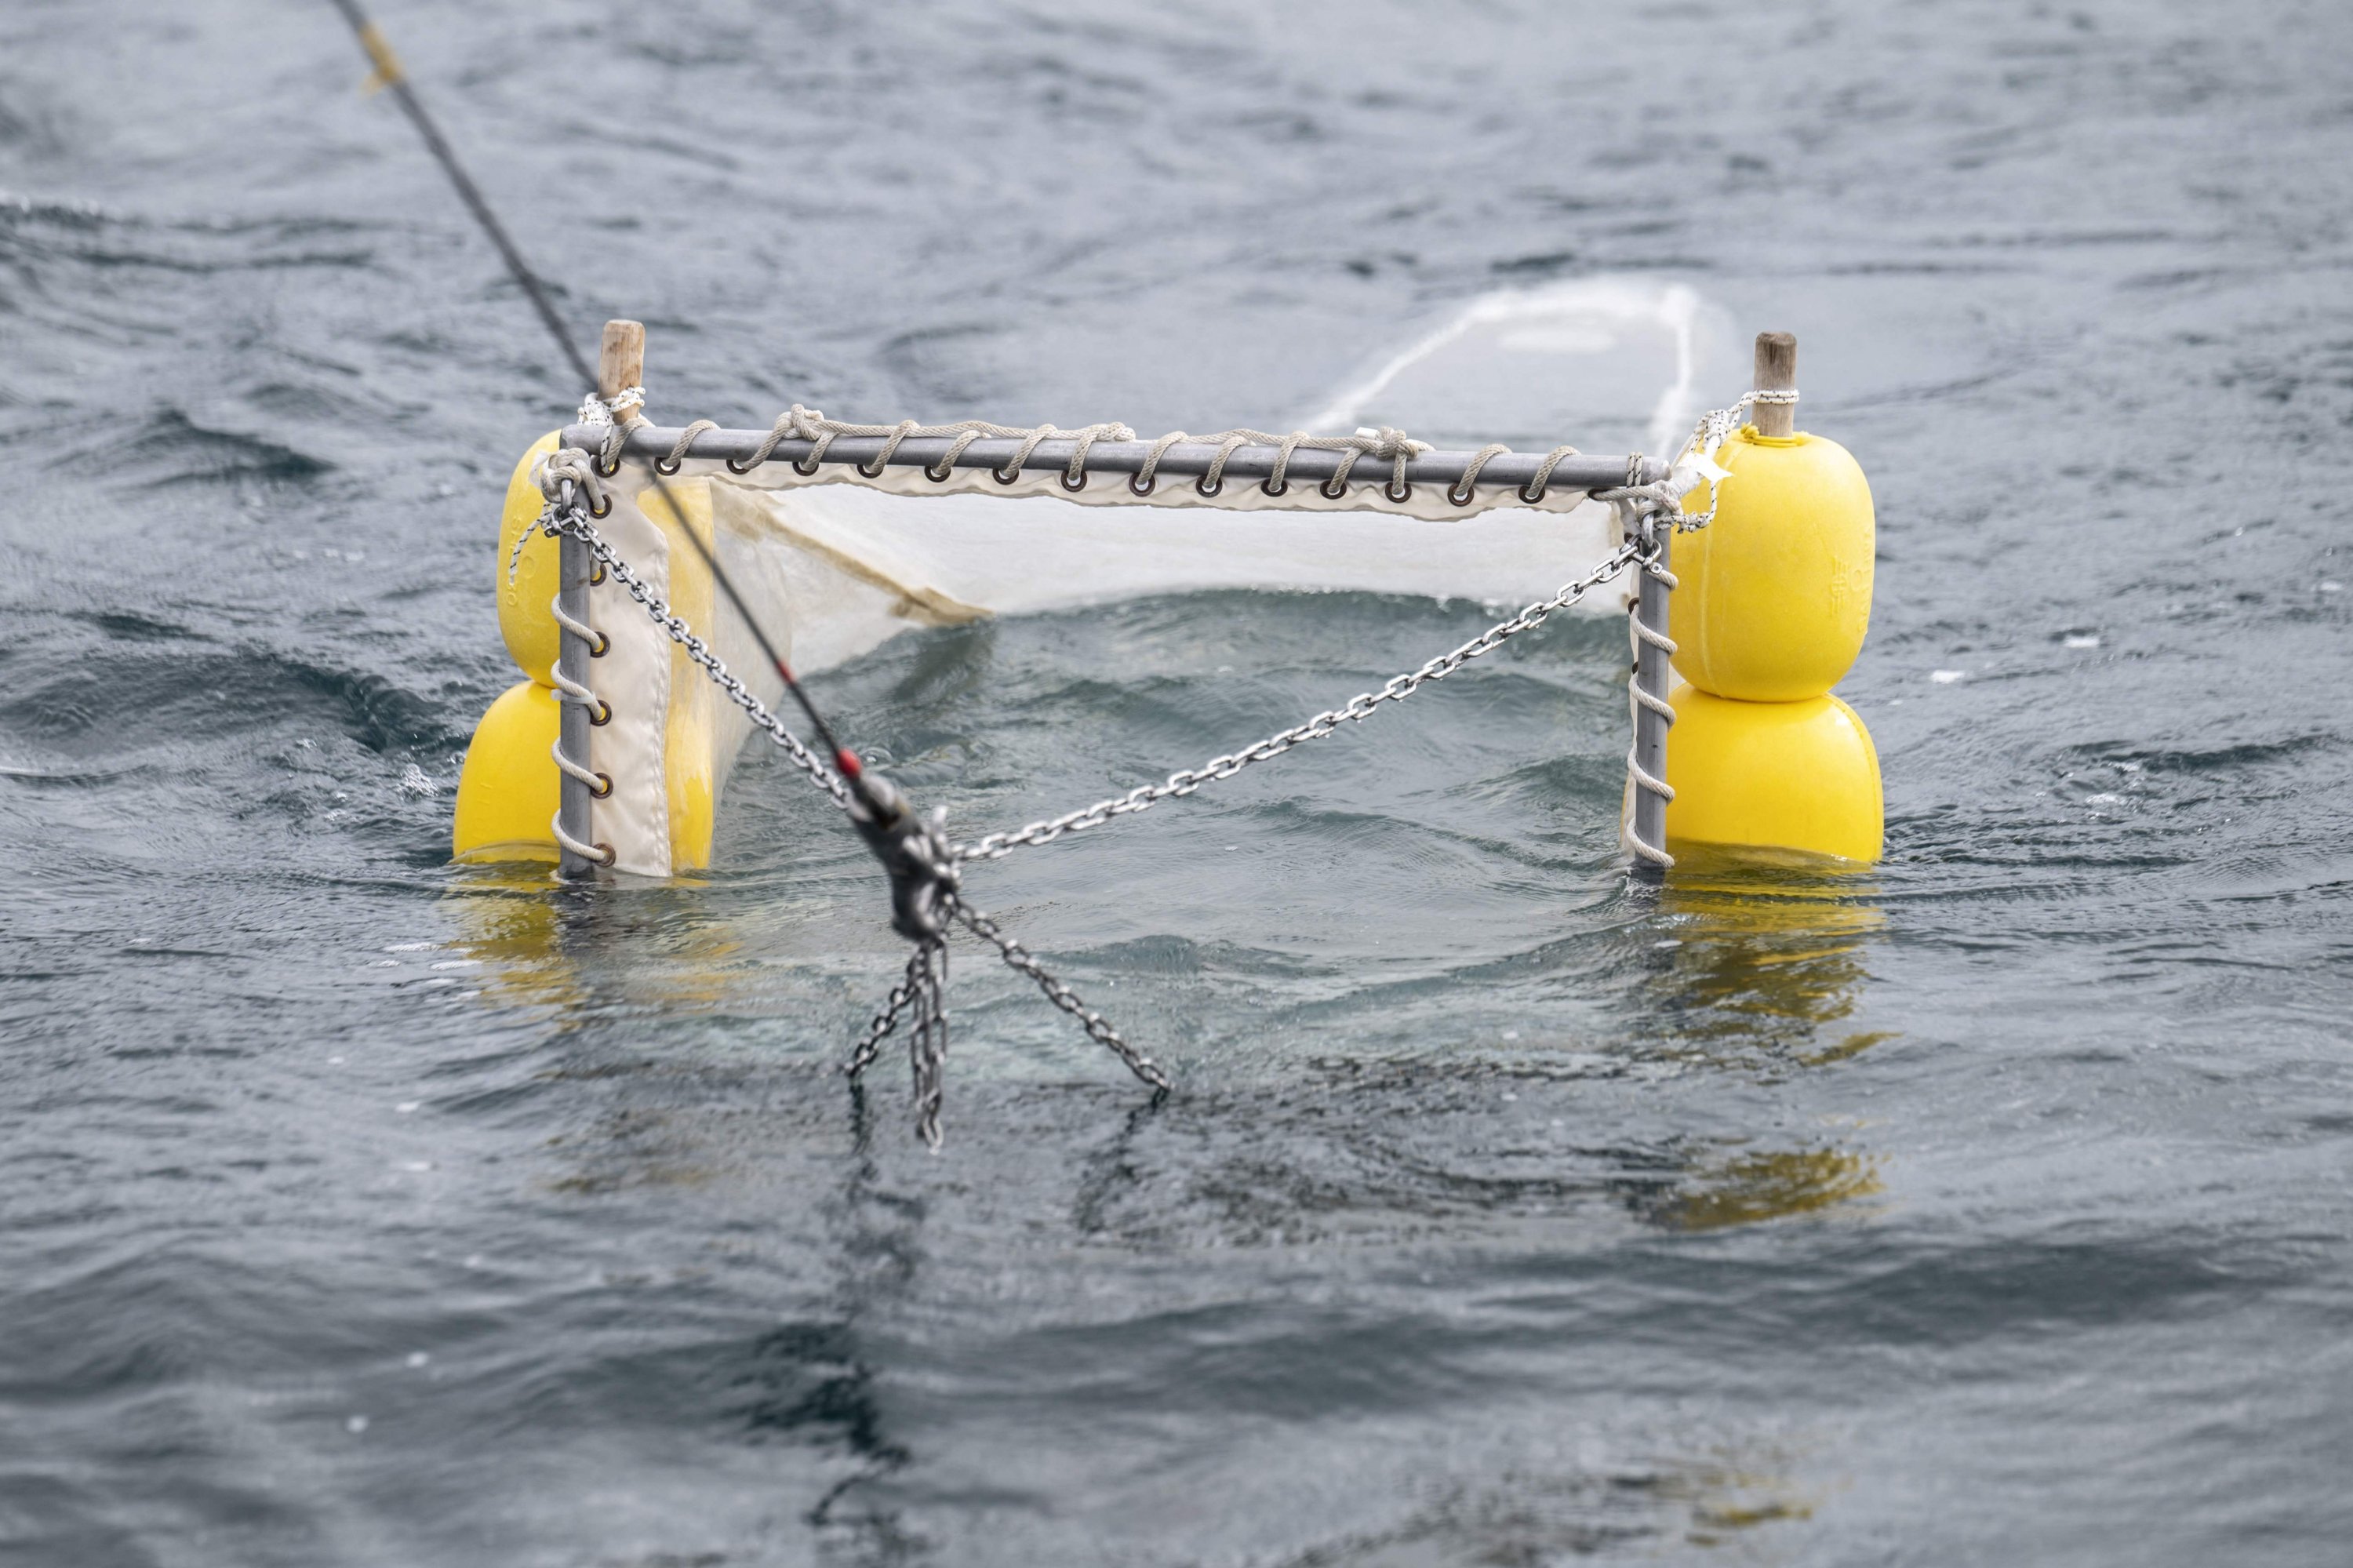 A funnel-shaped net nicknamed "the sock" is pulled along the water